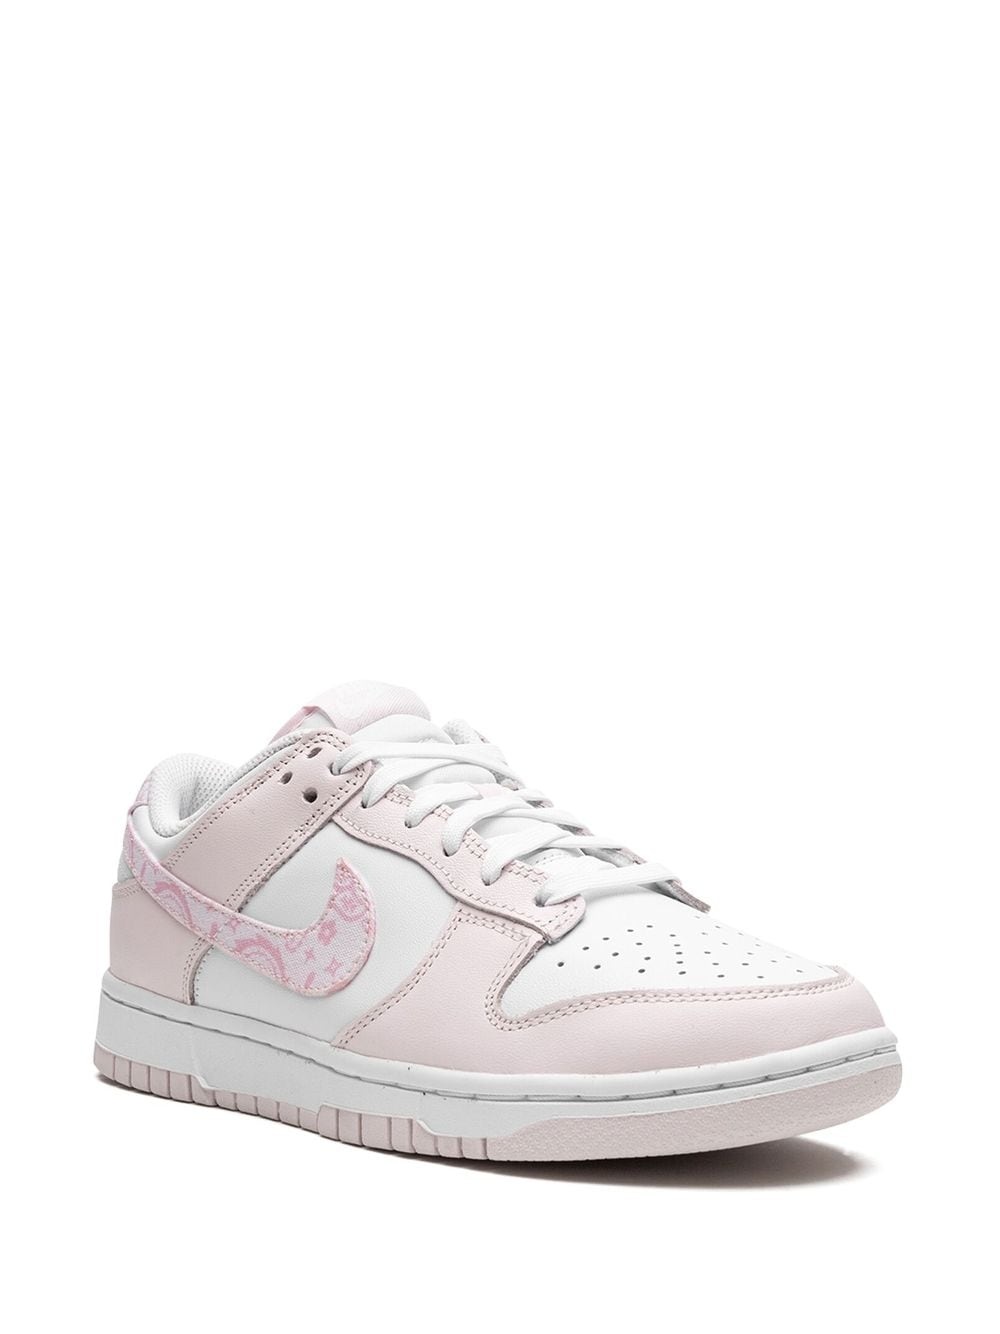 Dunk Low "Pink Paisley" sneakers - 2